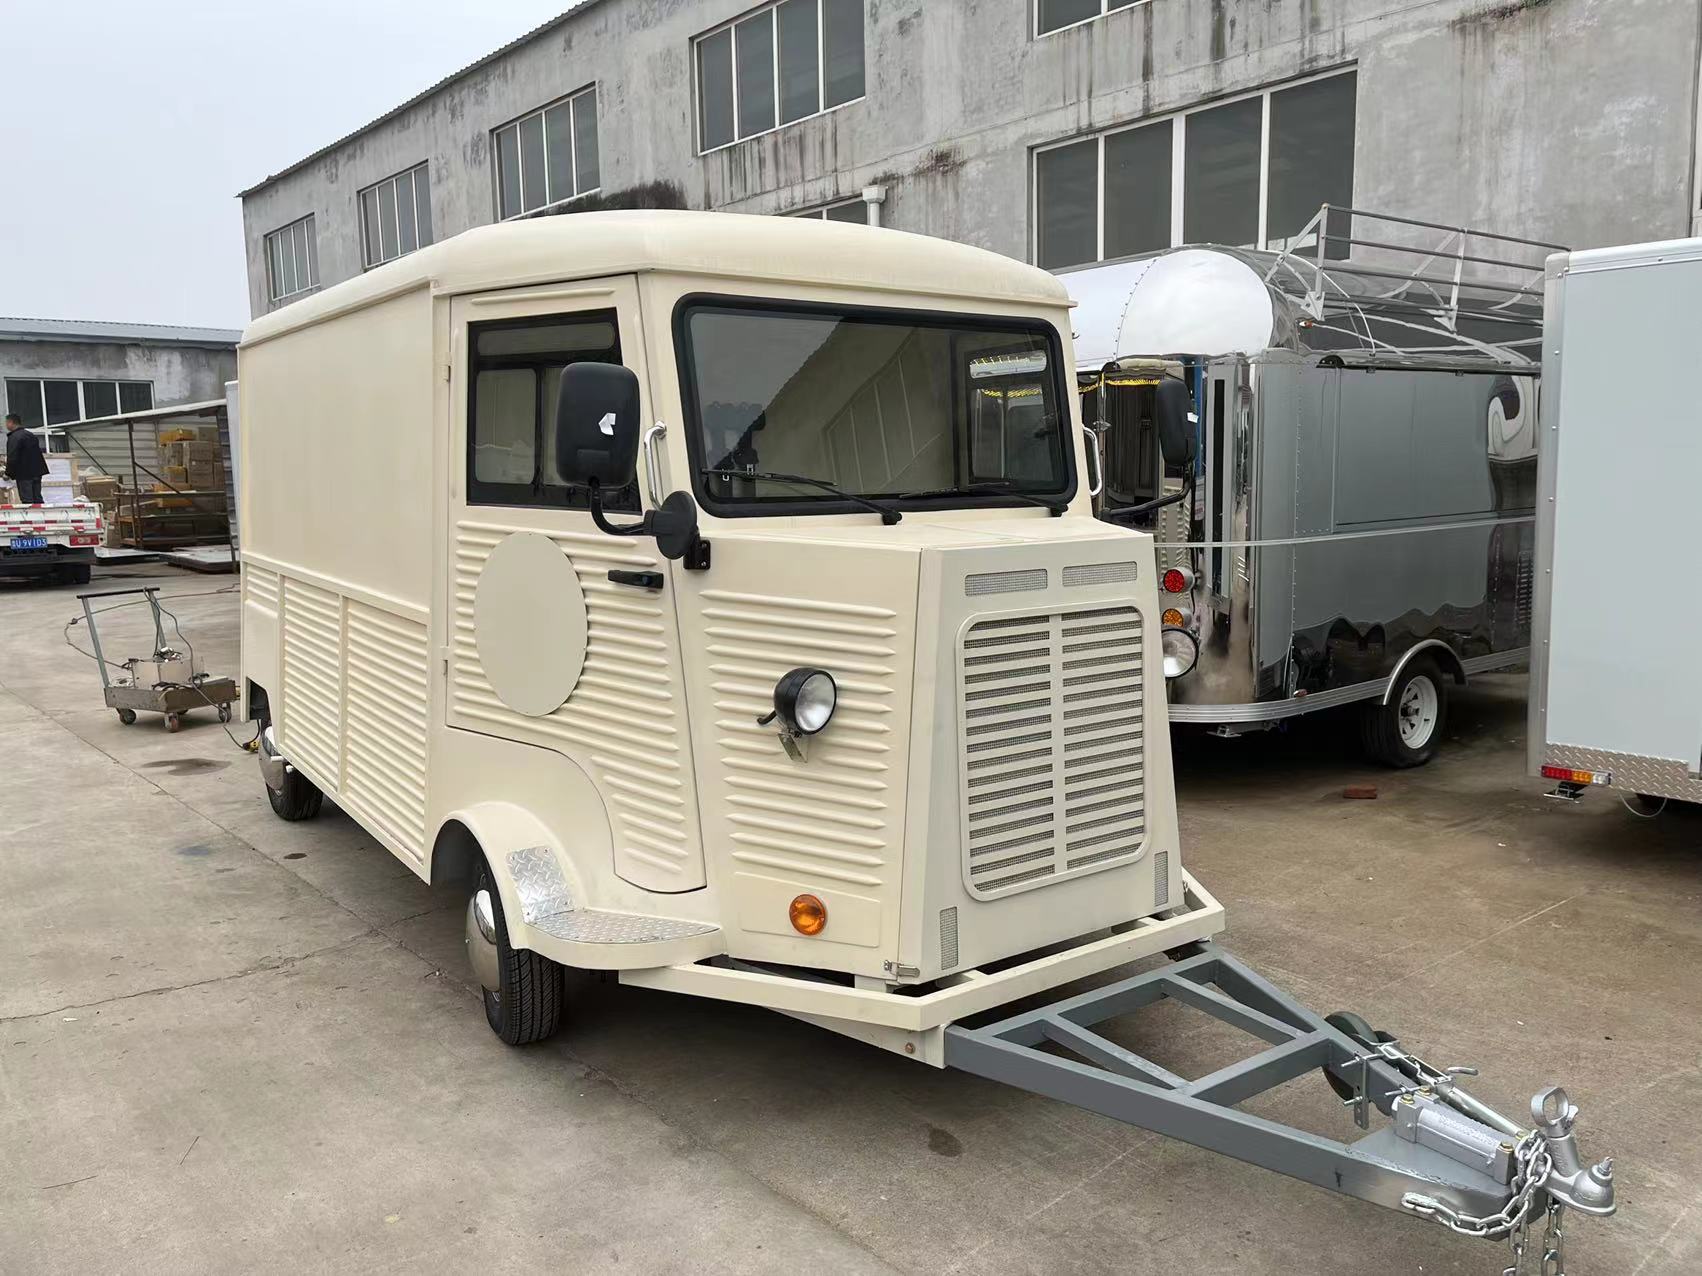 USA Standard Citroen Hy Truck with a removable tow bar